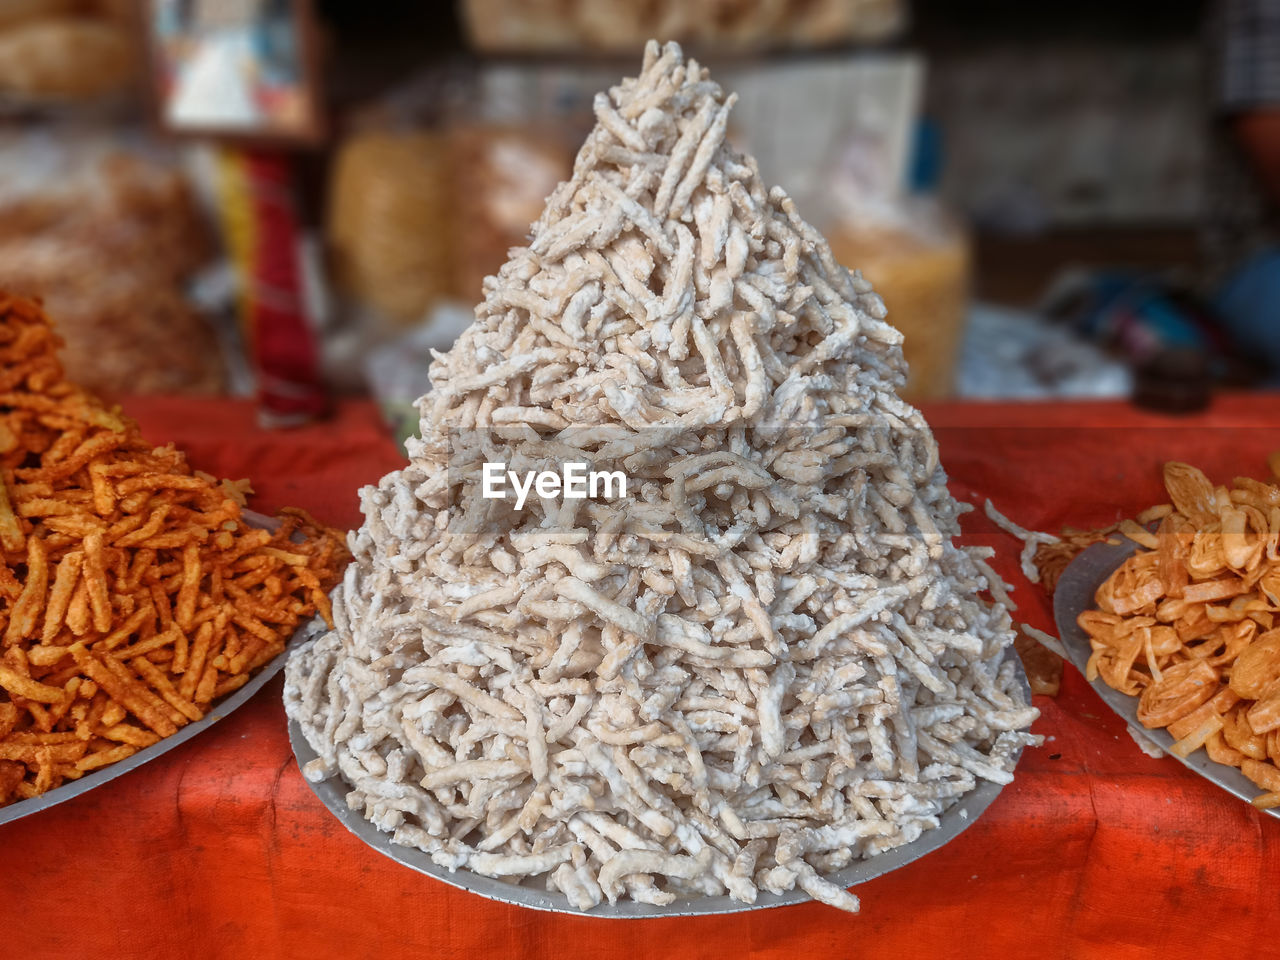 food and drink, food, market, market stall, retail, freshness, dried food, business finance and industry, business, variation, asian food, abundance, dish, no people, spice, large group of objects, focus on foreground, healthy eating, for sale, selling, wellbeing, dry, tradition, container, meal